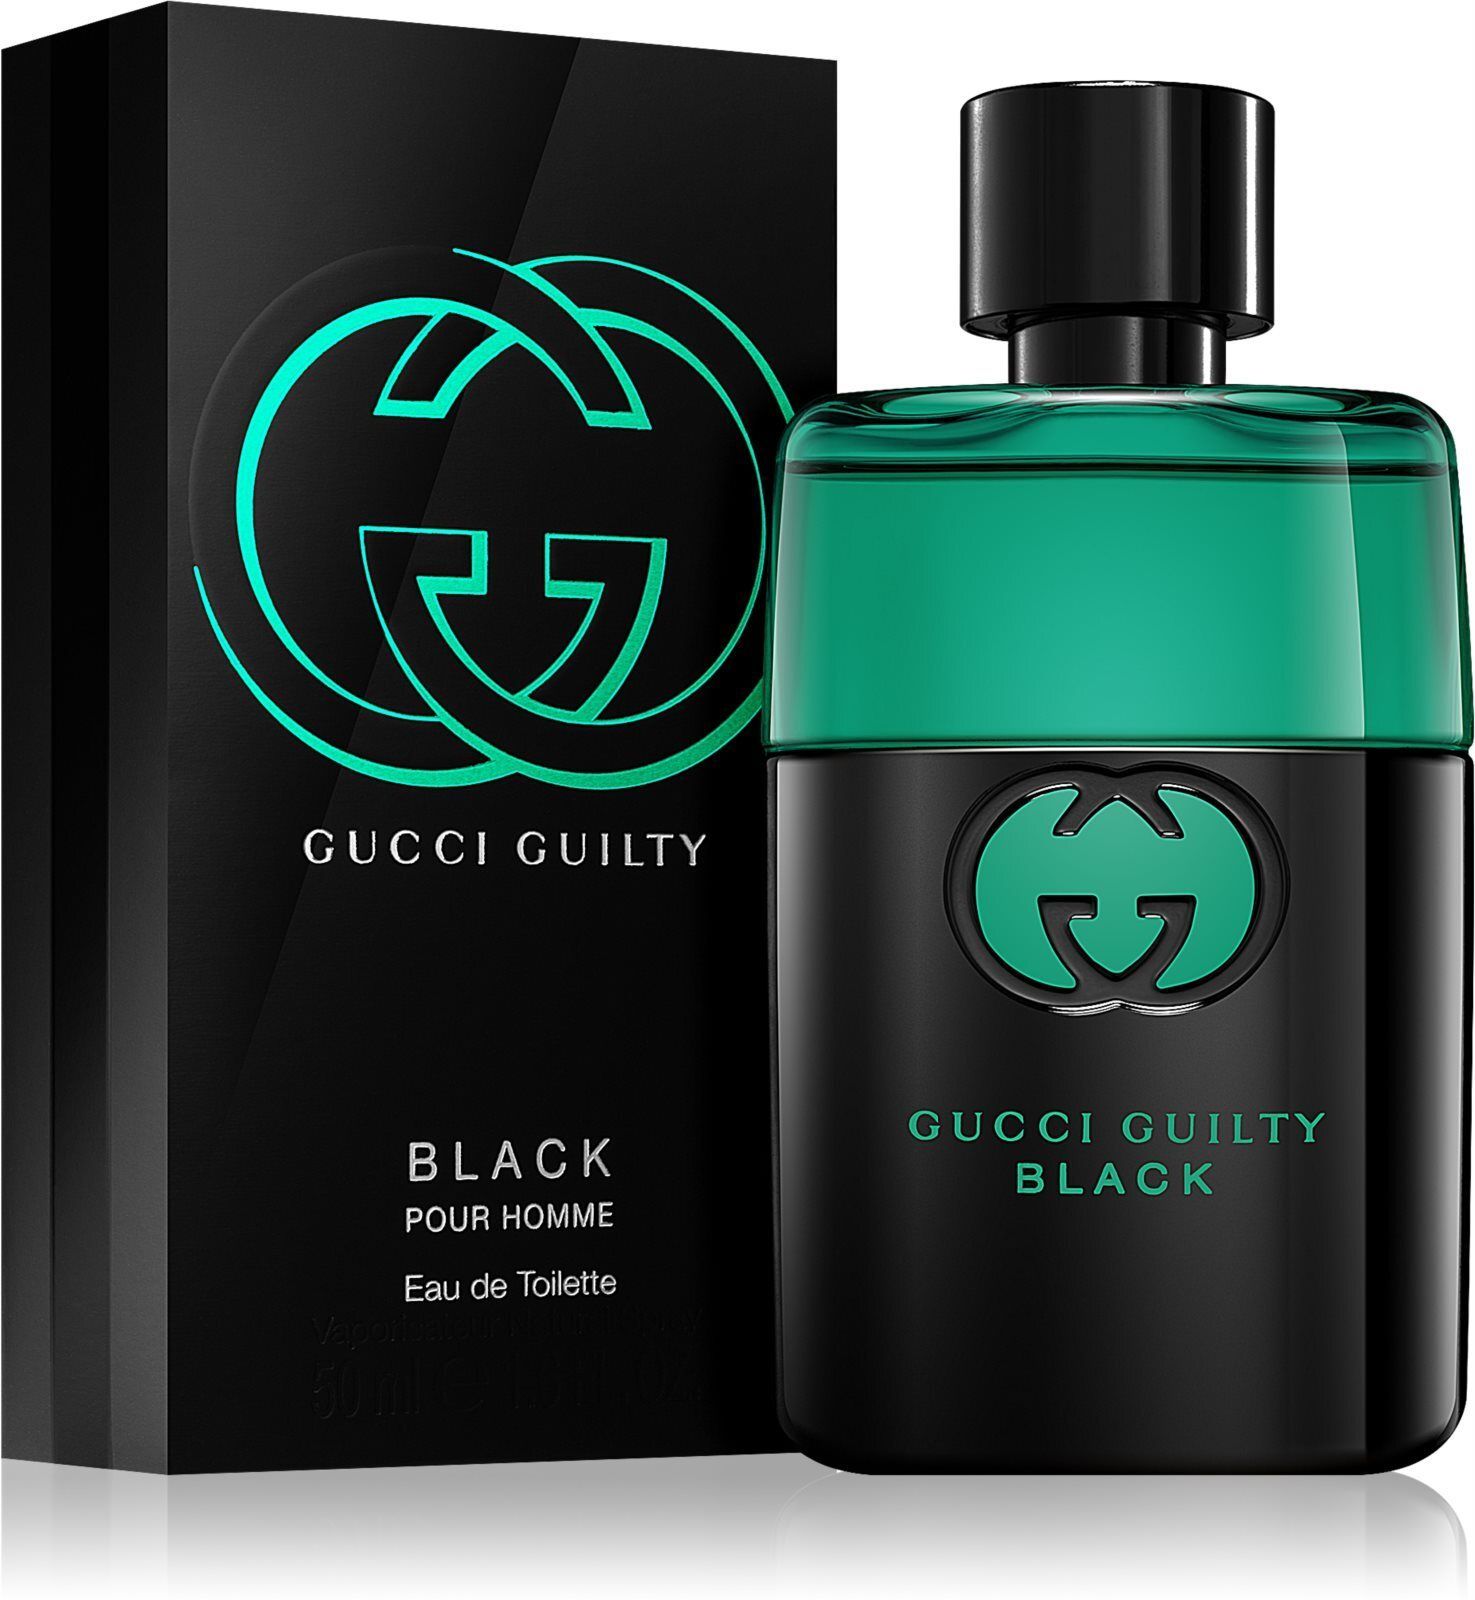 Гуччи мужской парфюм. Gucci guilty Black pour homme EDT, 90 ml. Gucci guilty Black pour homme. Gucci guilty Black мужской. Туалетная вода Gucci guilty Black.